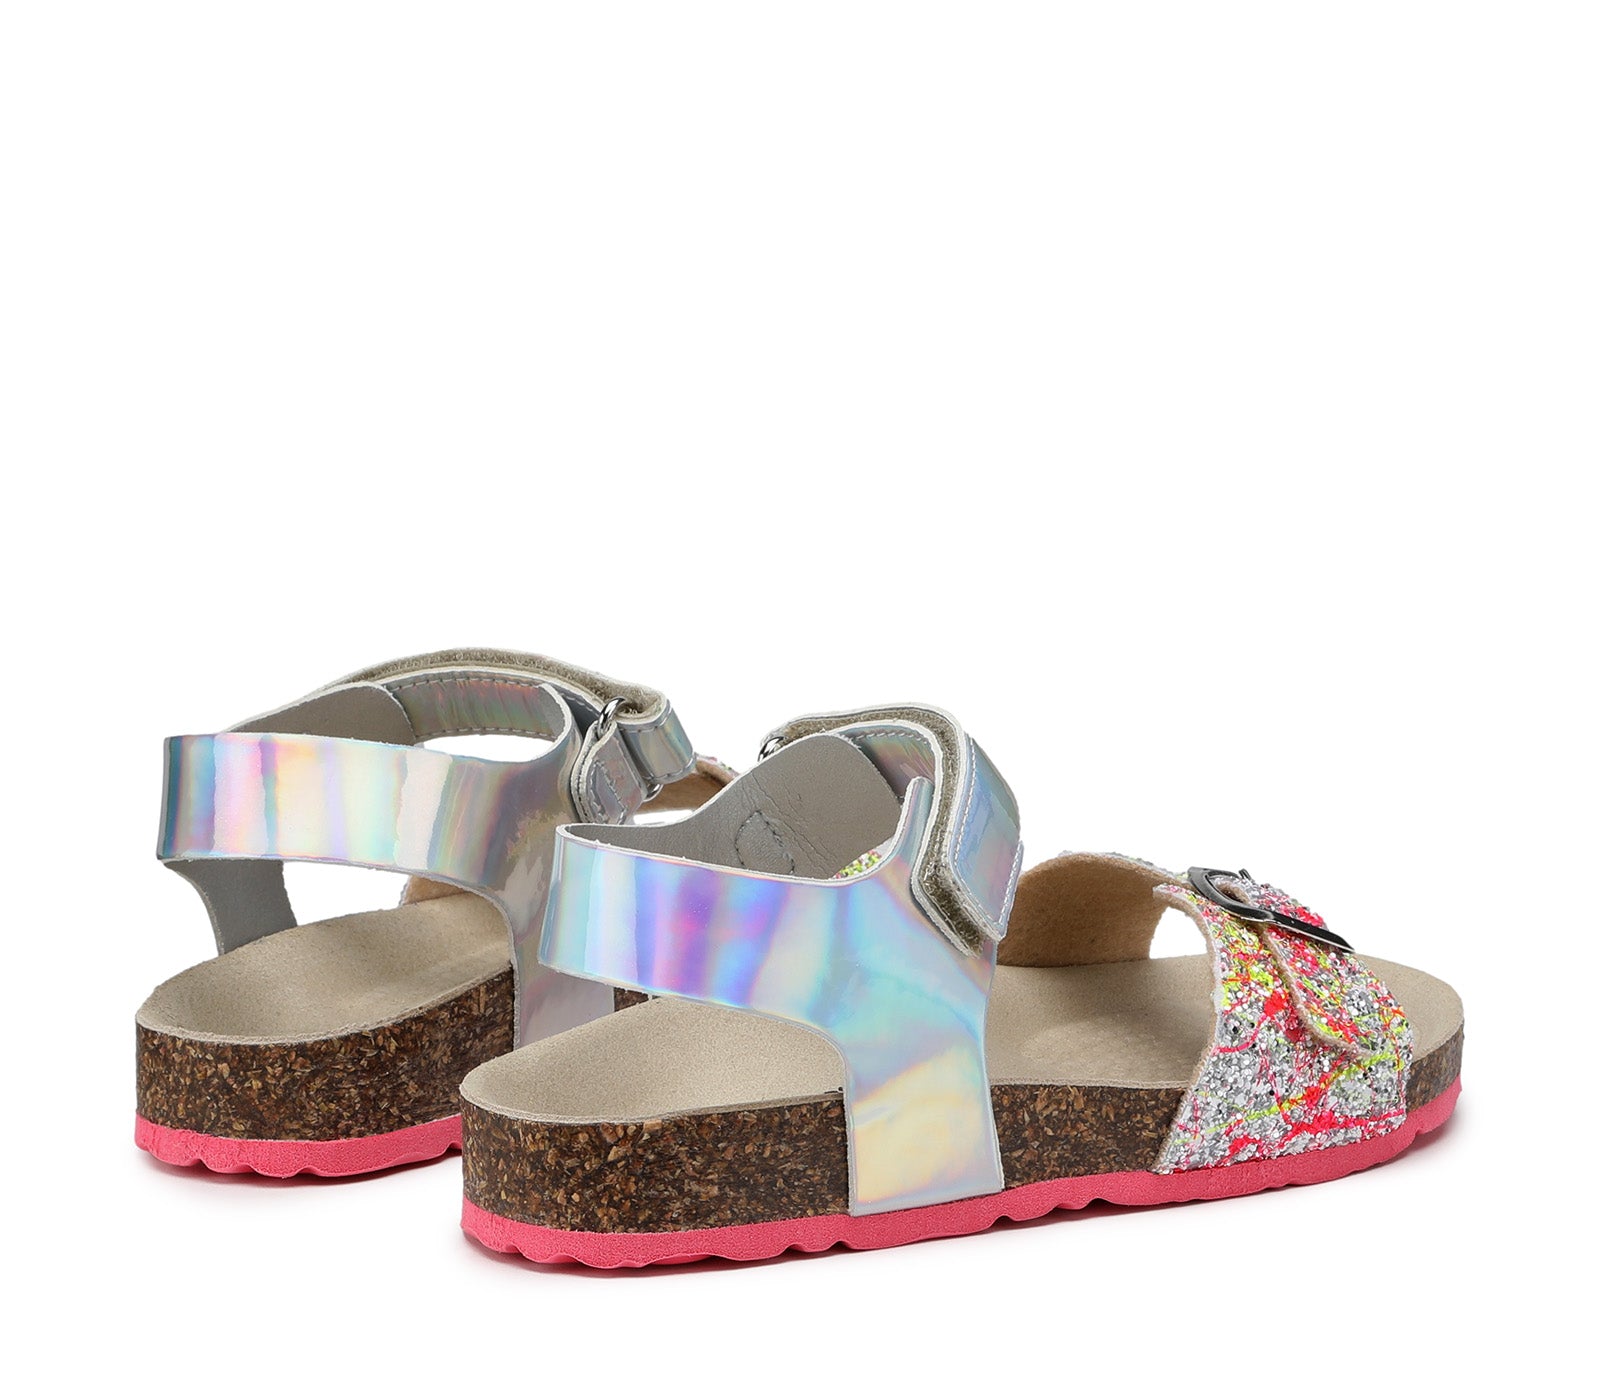 Children's Multicolor Glitter Sandals with Velcro Closure and Pink Sole